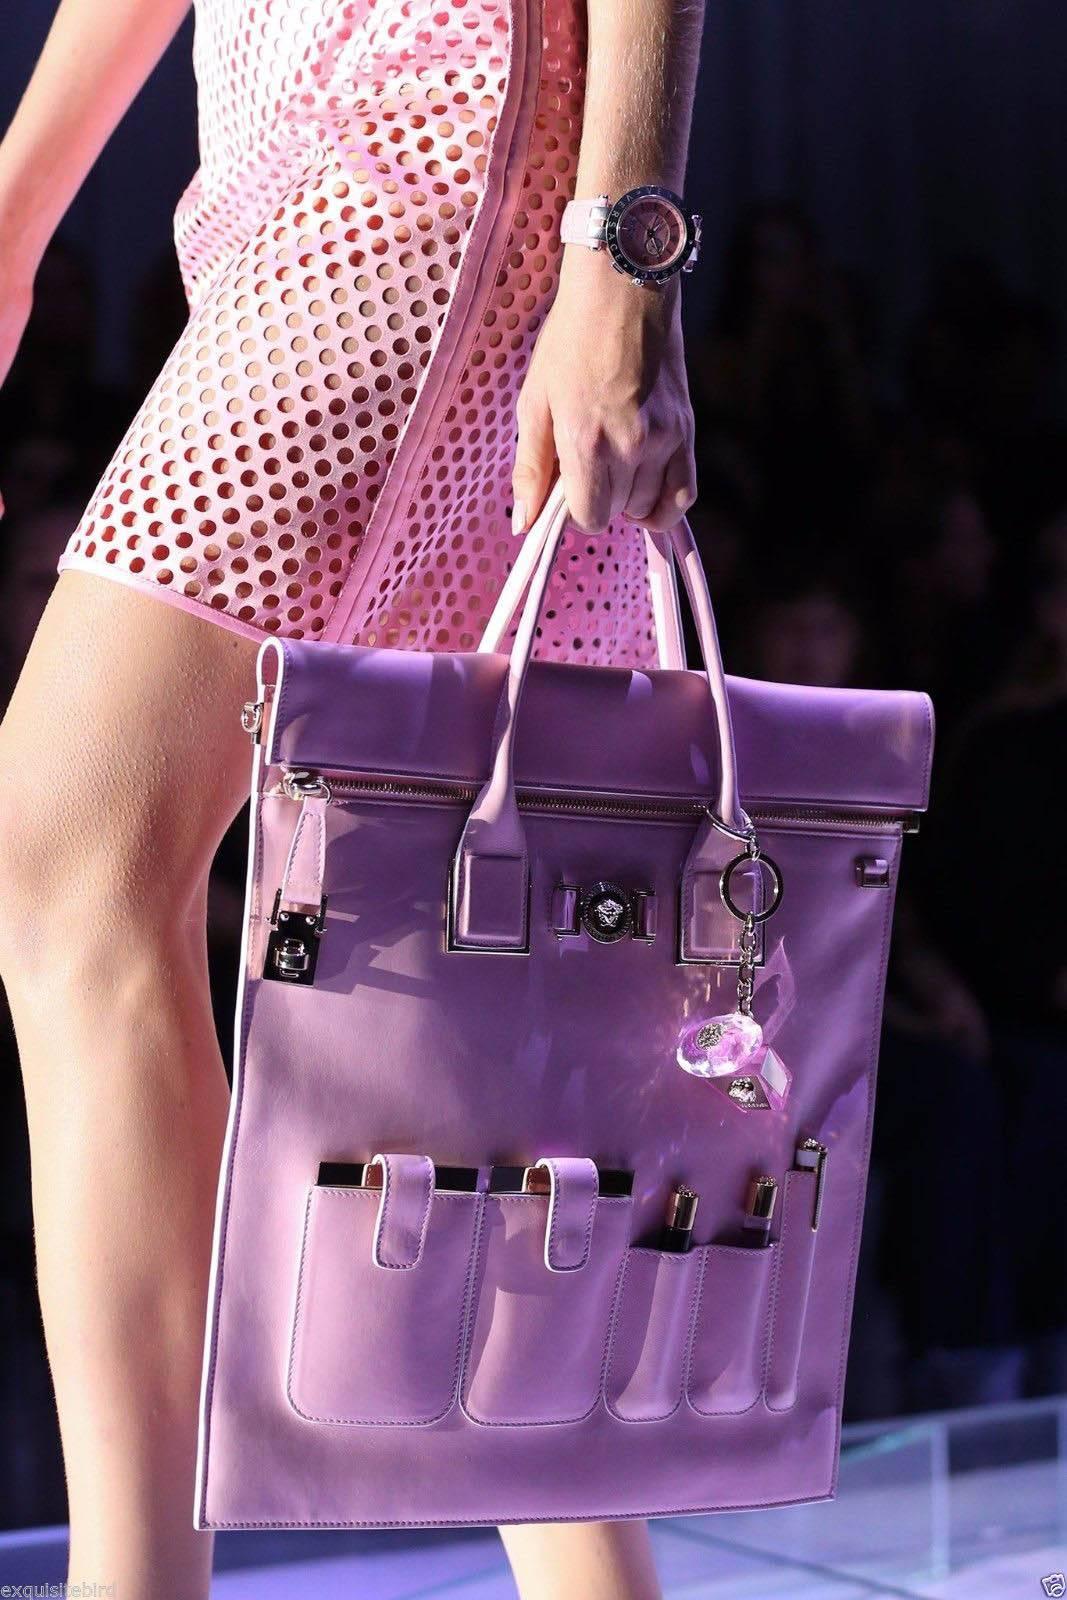 Women's or Men's S/S 2015 Look # 21 NEW VERSACE POWDER PINK LEATHER ORGANIZER BAG For Sale